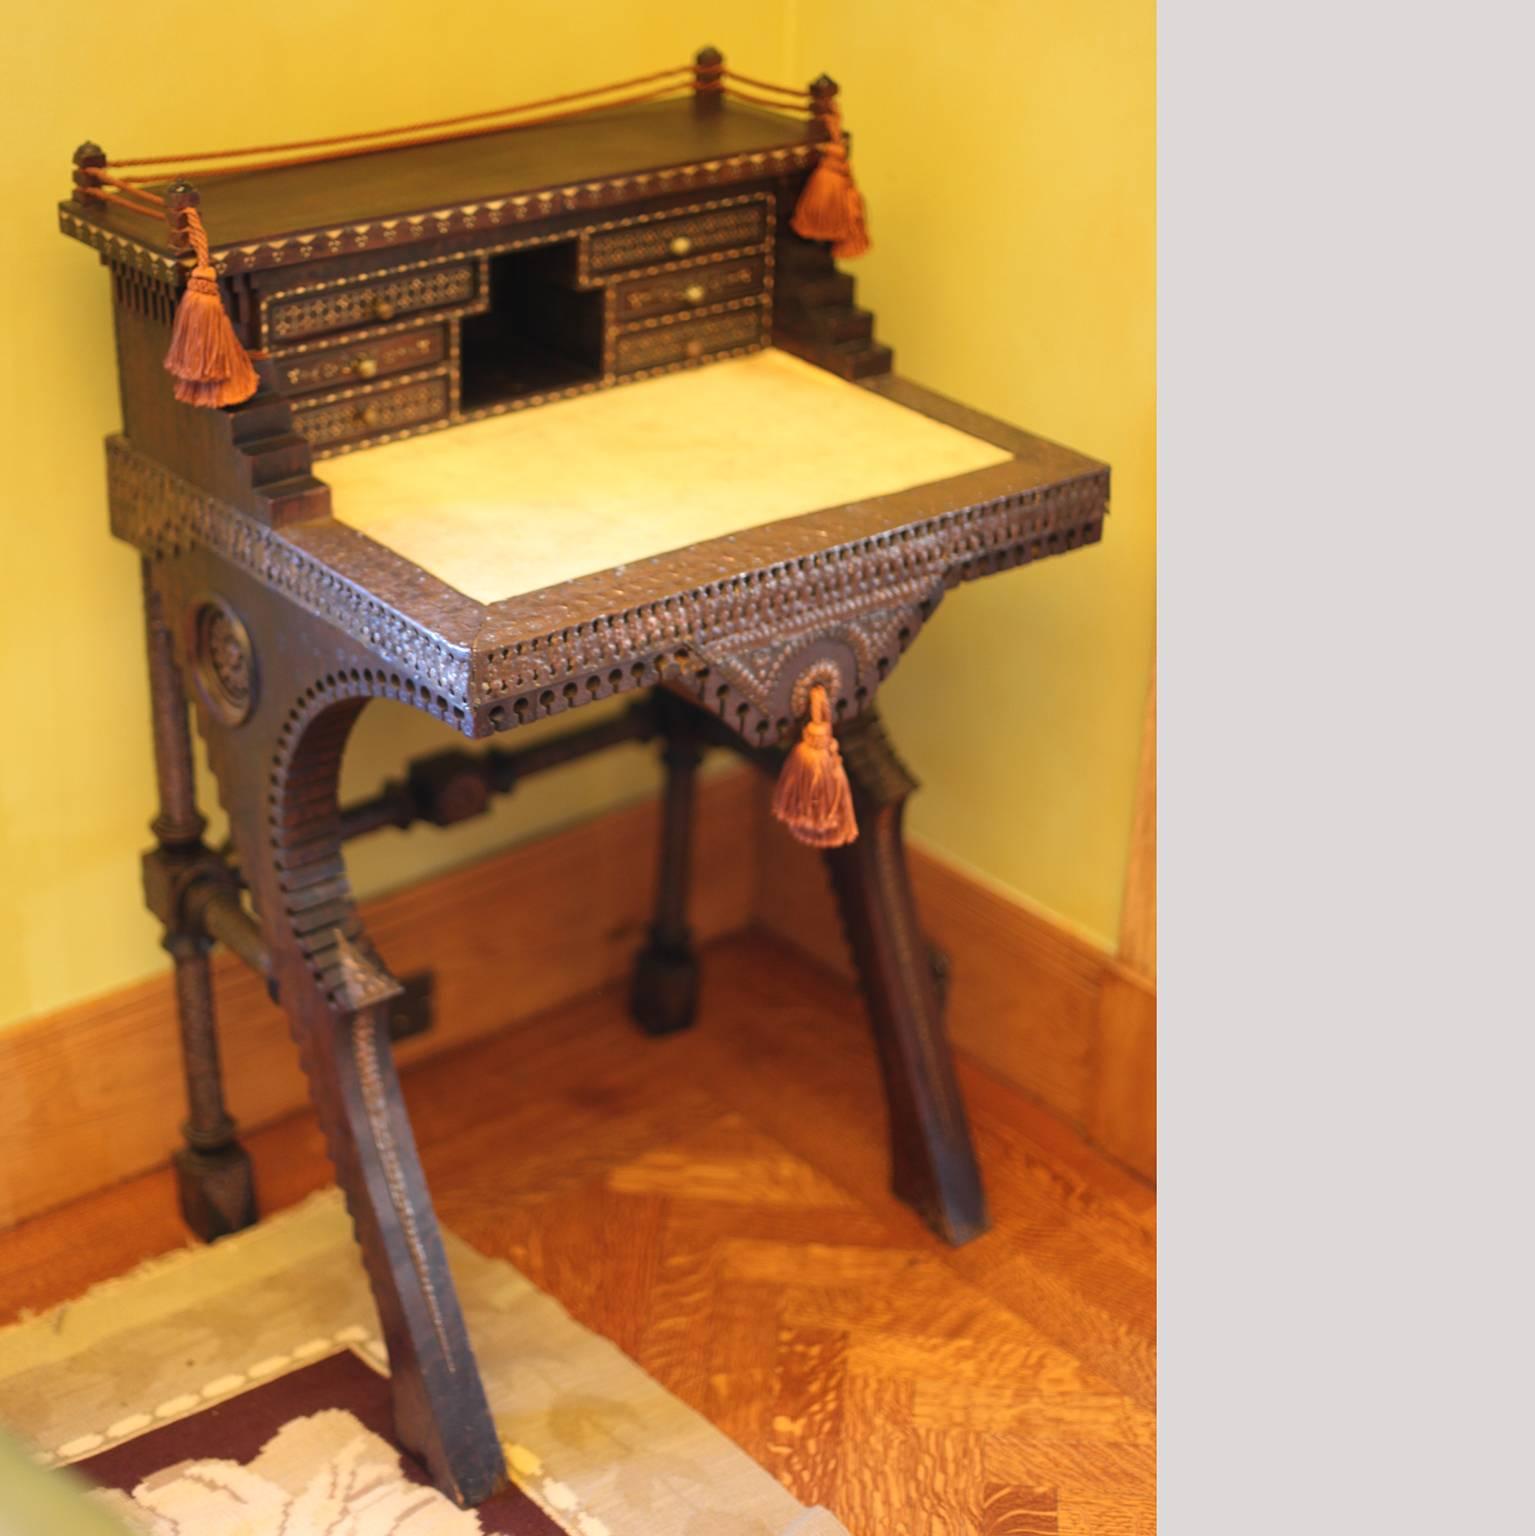 We are pleased to offer for your consideration a desk by Carlo Bugatti. I have the matching chair in another posting. Visit our dealer page to view all the Bugatti items available in our collection.

Dimensions: 38 3/8